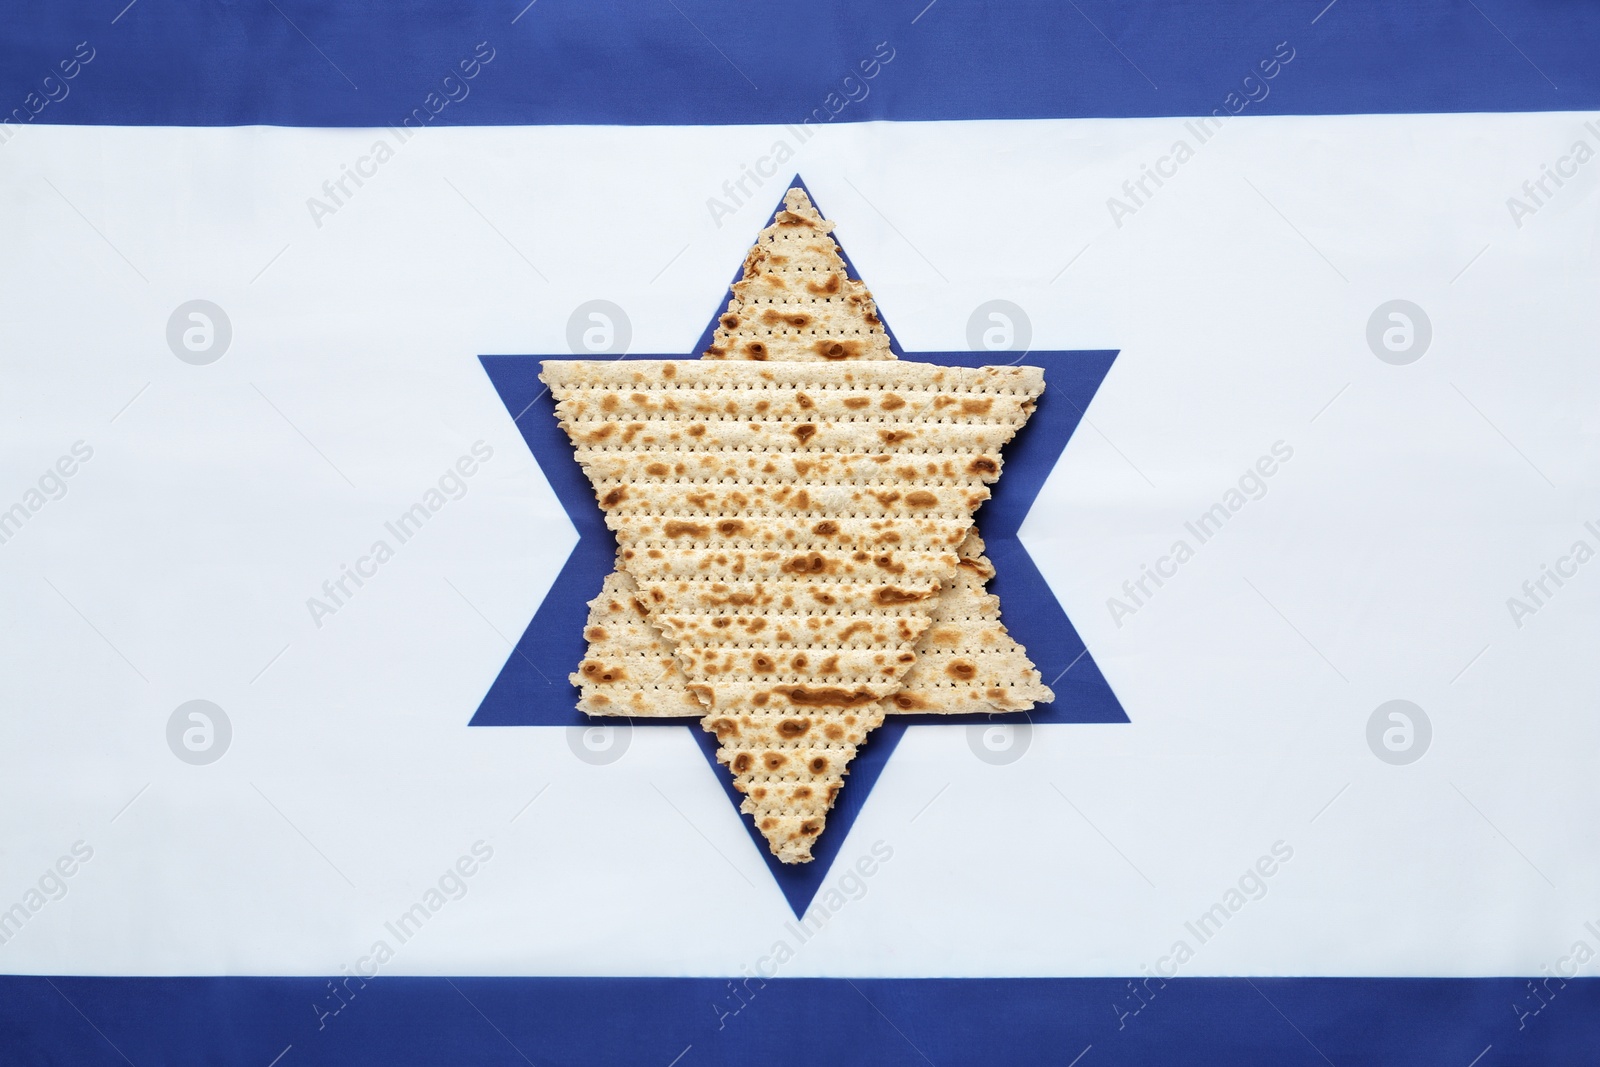 Photo of Star of David made with passover matzos on Israel flag, top view